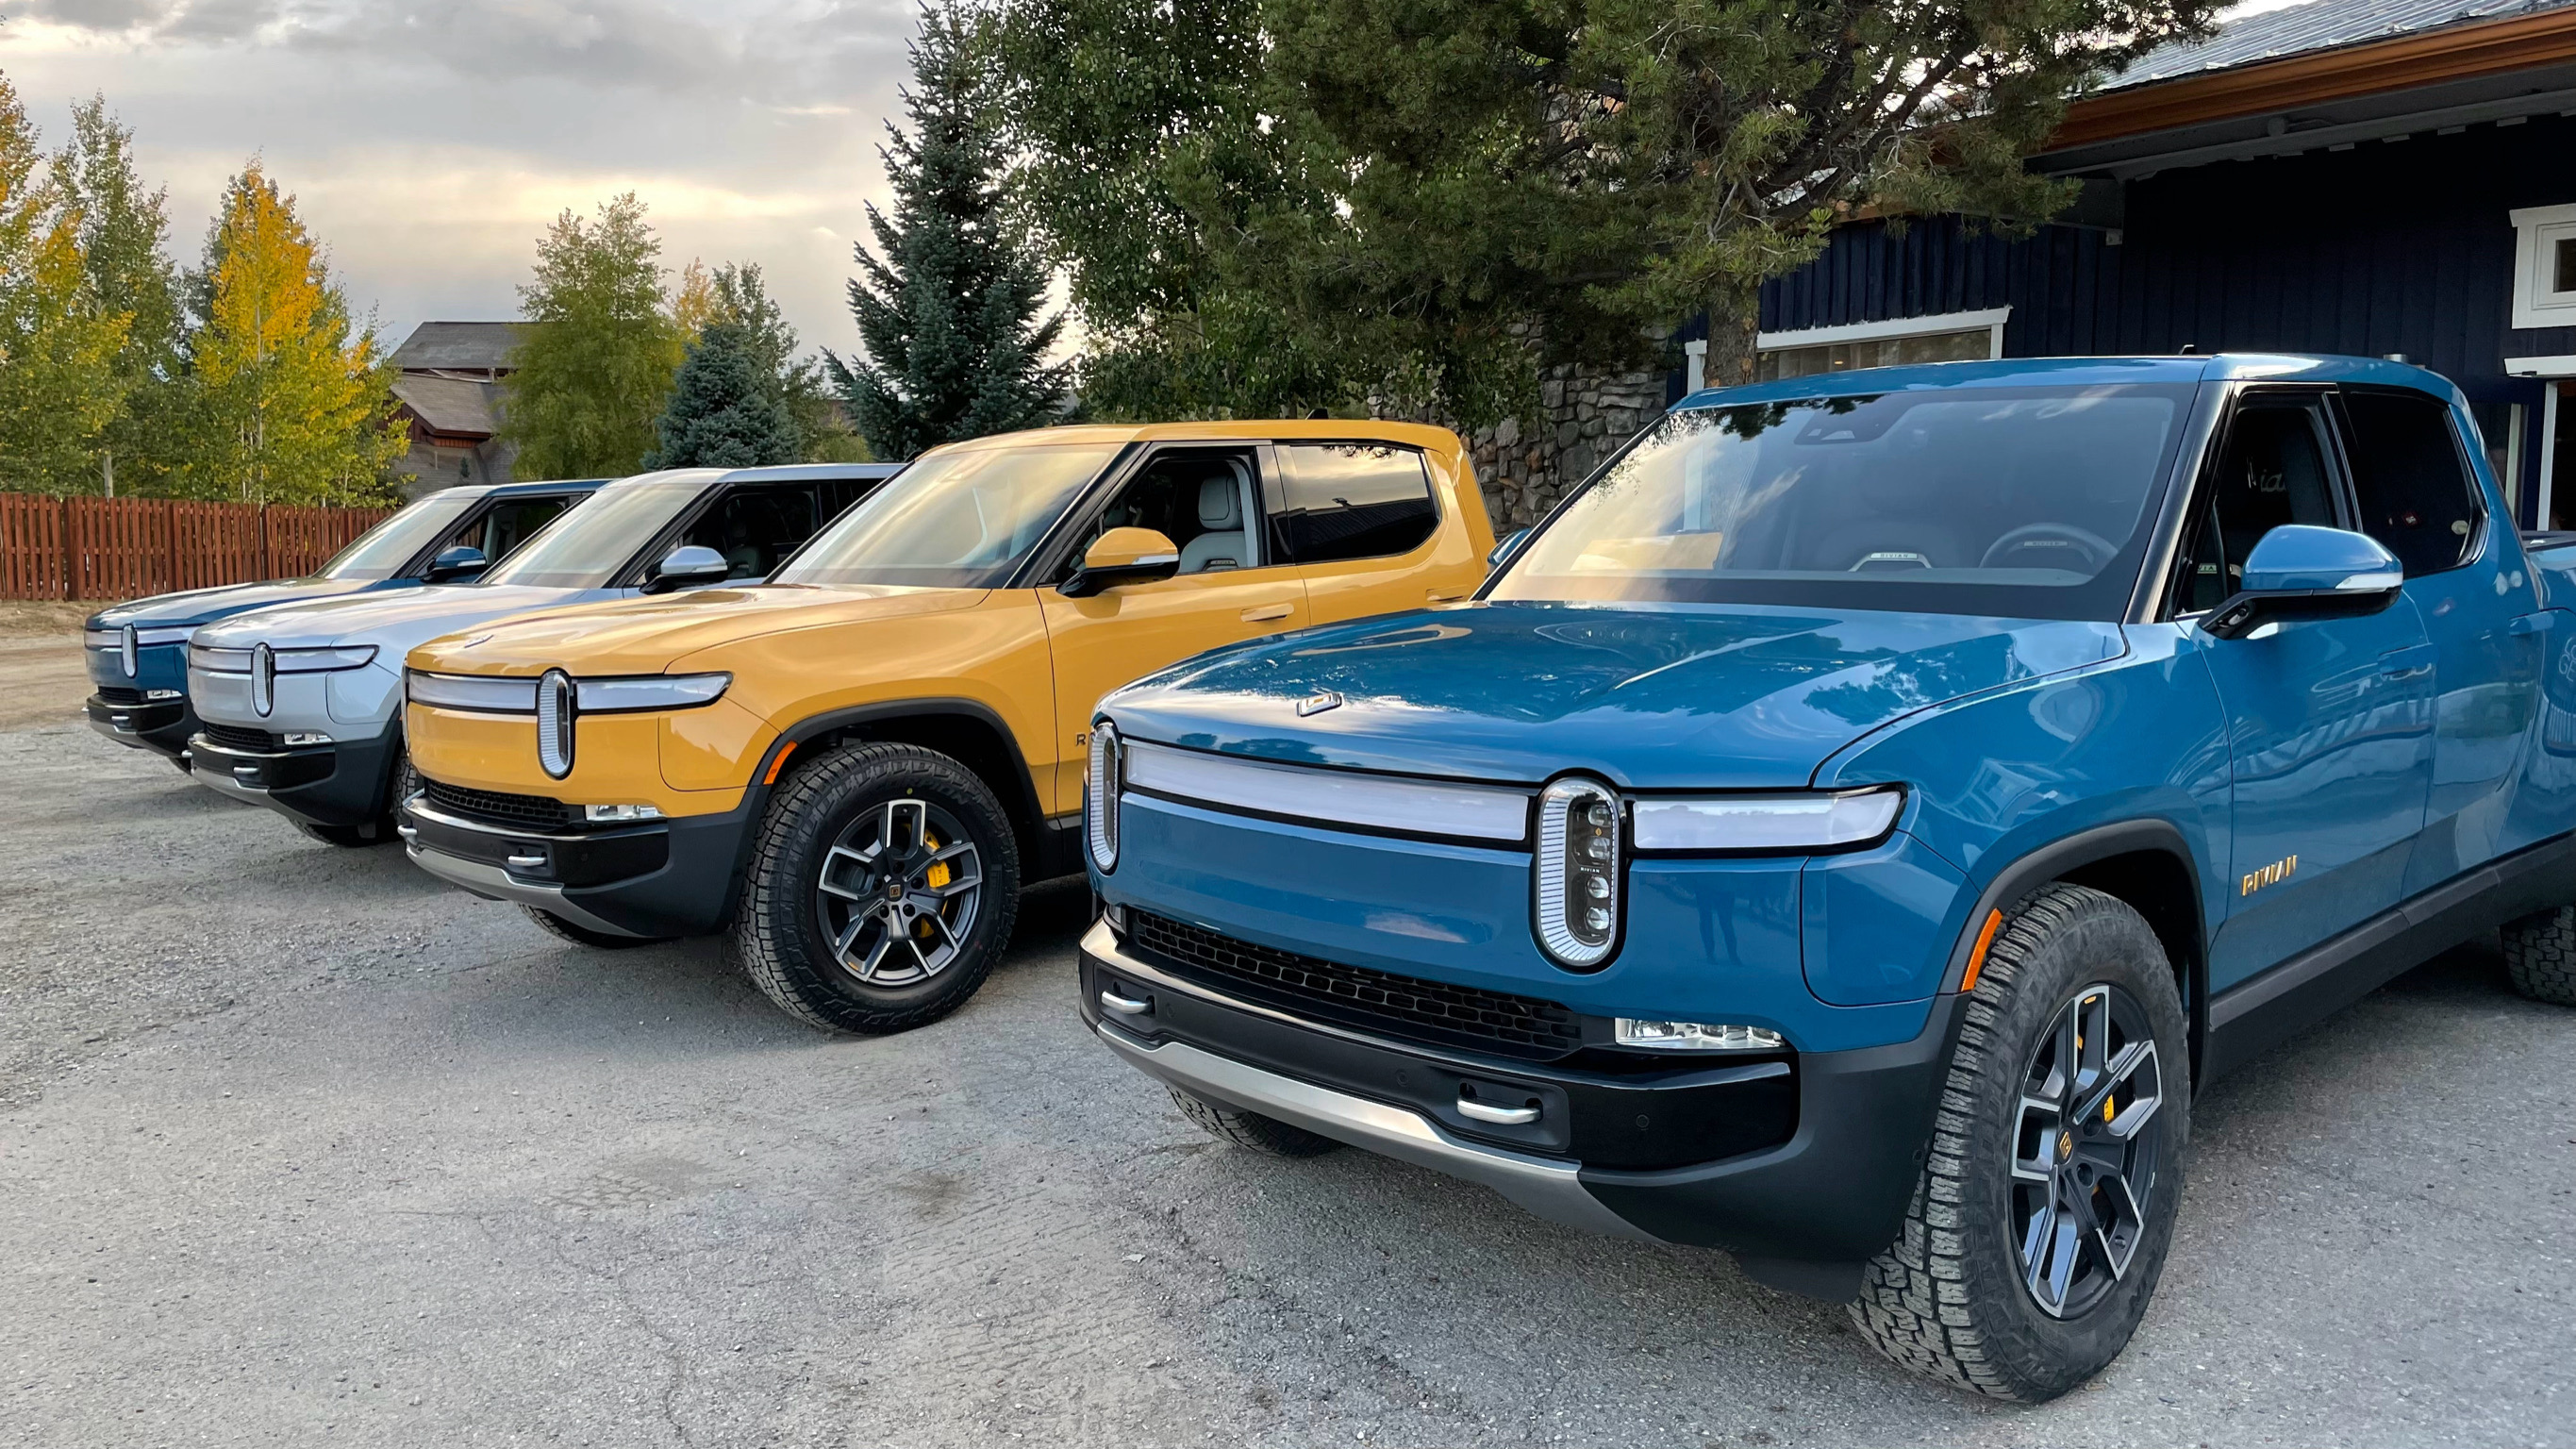 Get Your Rivian Vehicle Quickly - Tips to Improve Delivery Experience and Trade-In Value